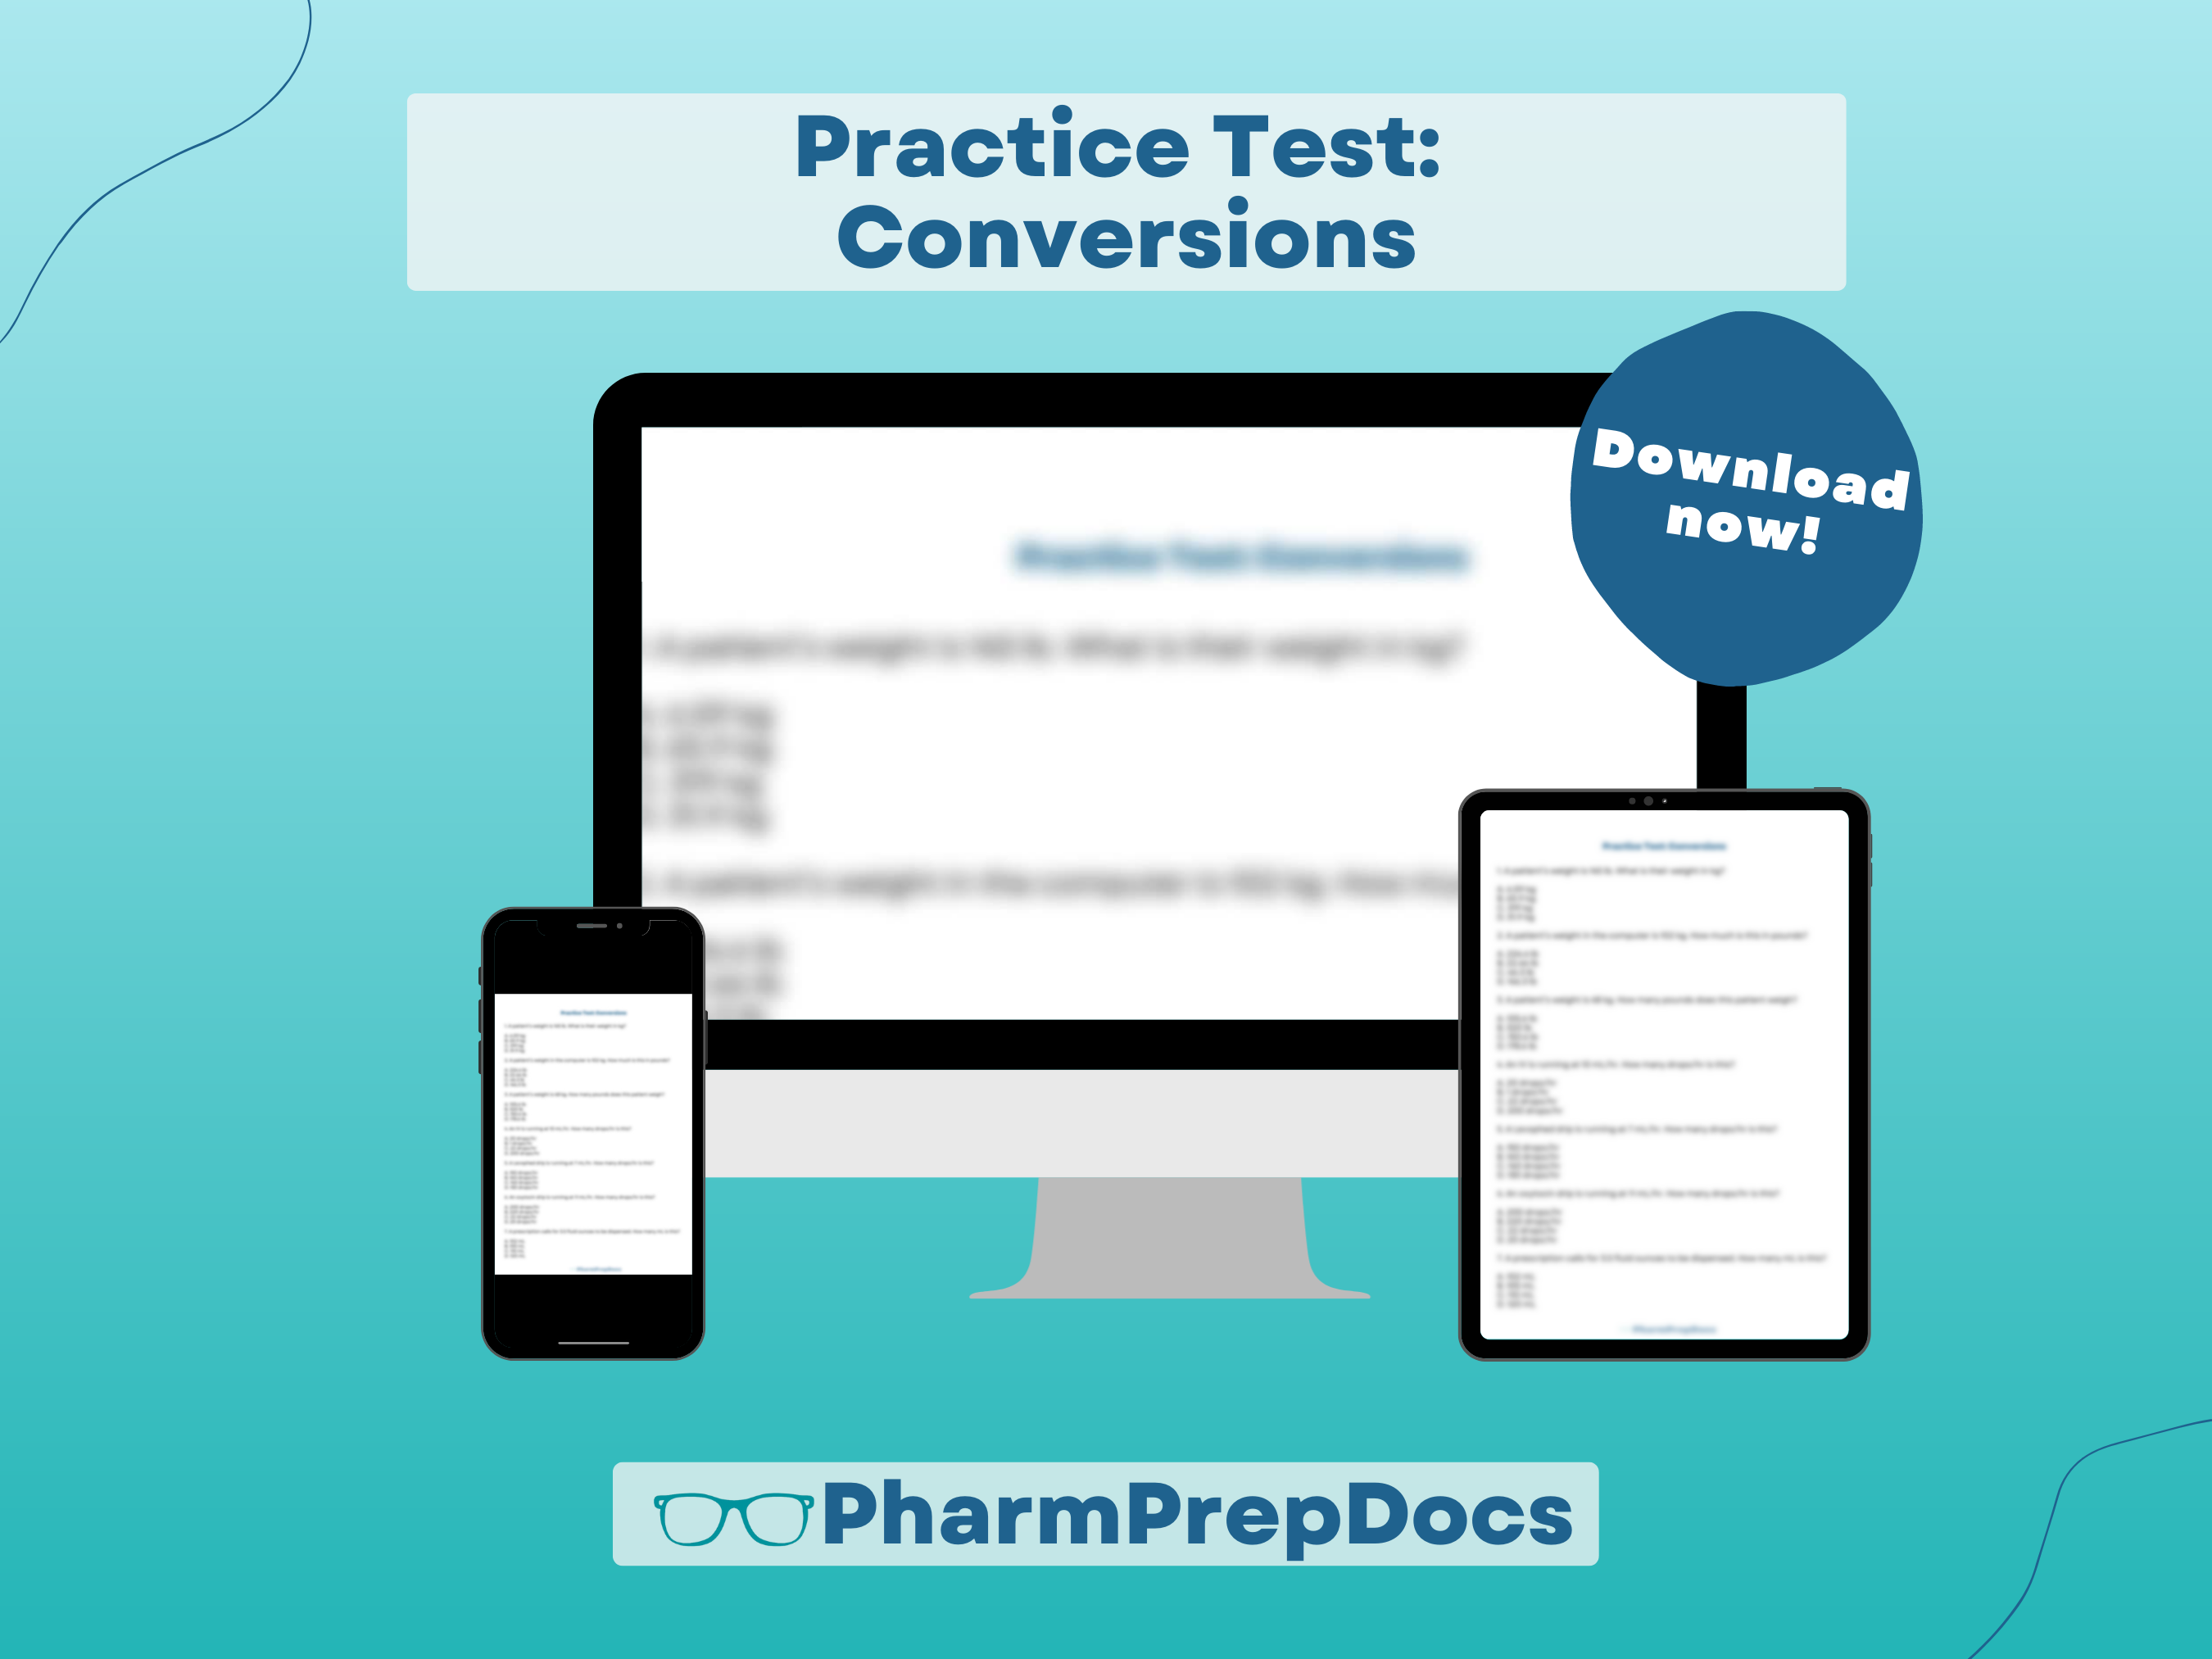 Practice Test: Medication Conversions